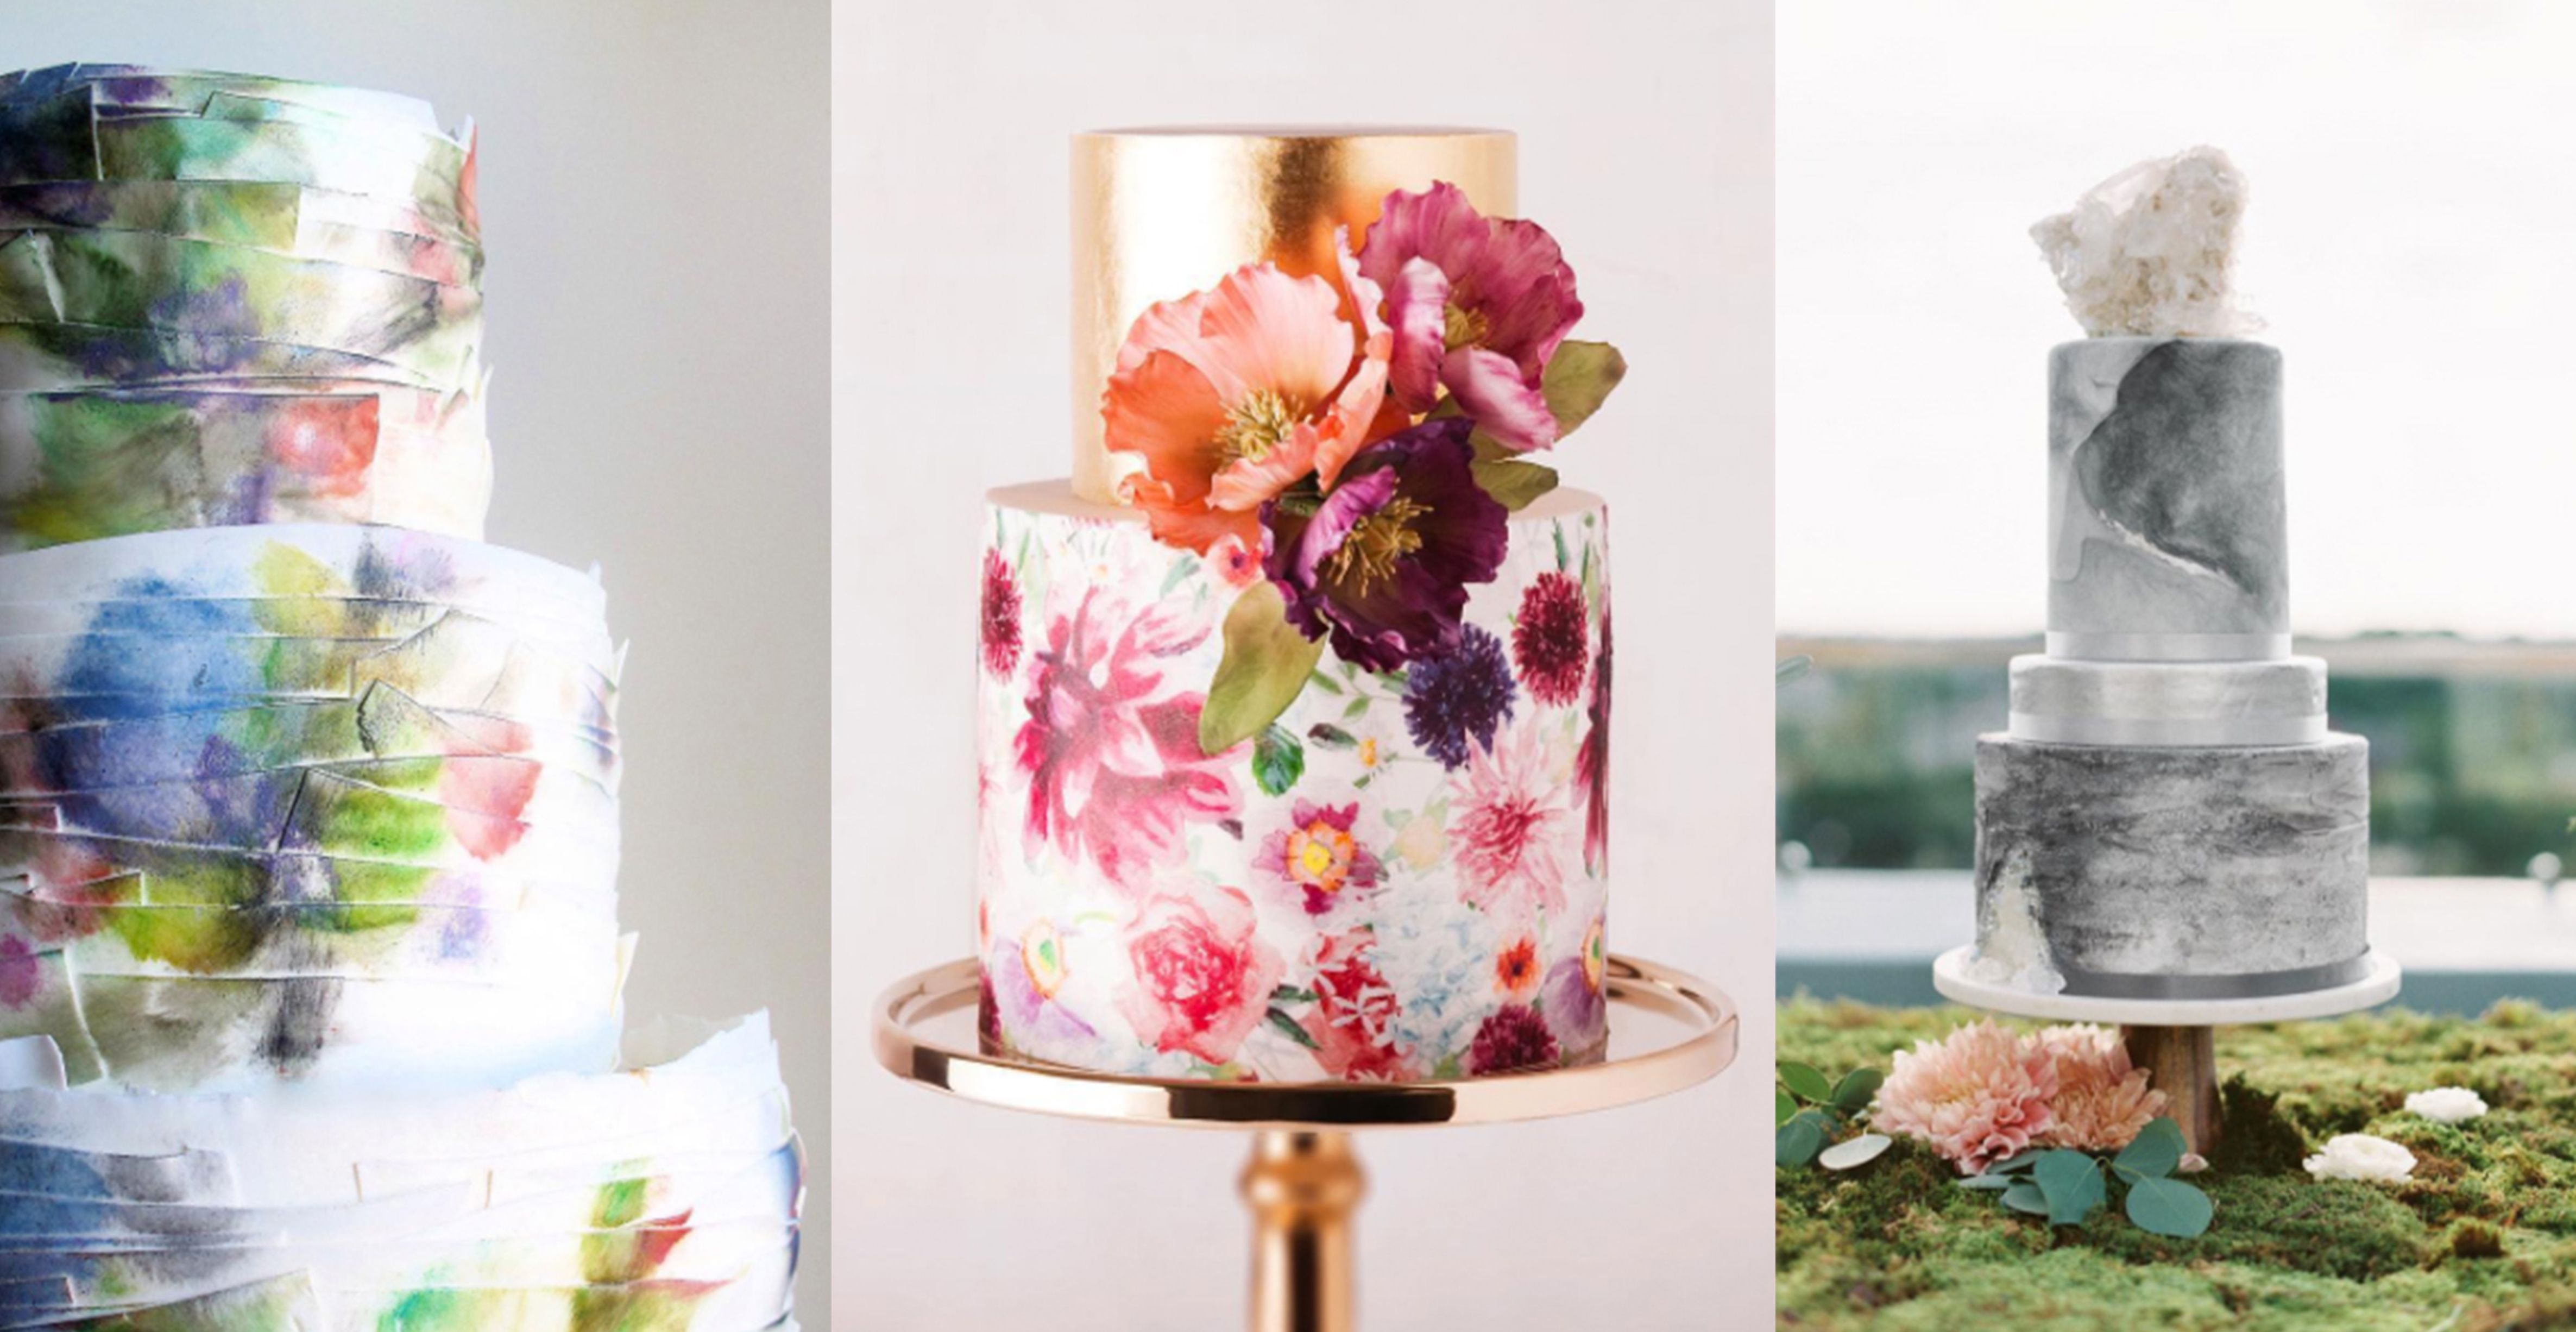 Discover 69+ watercolor wedding cake latest